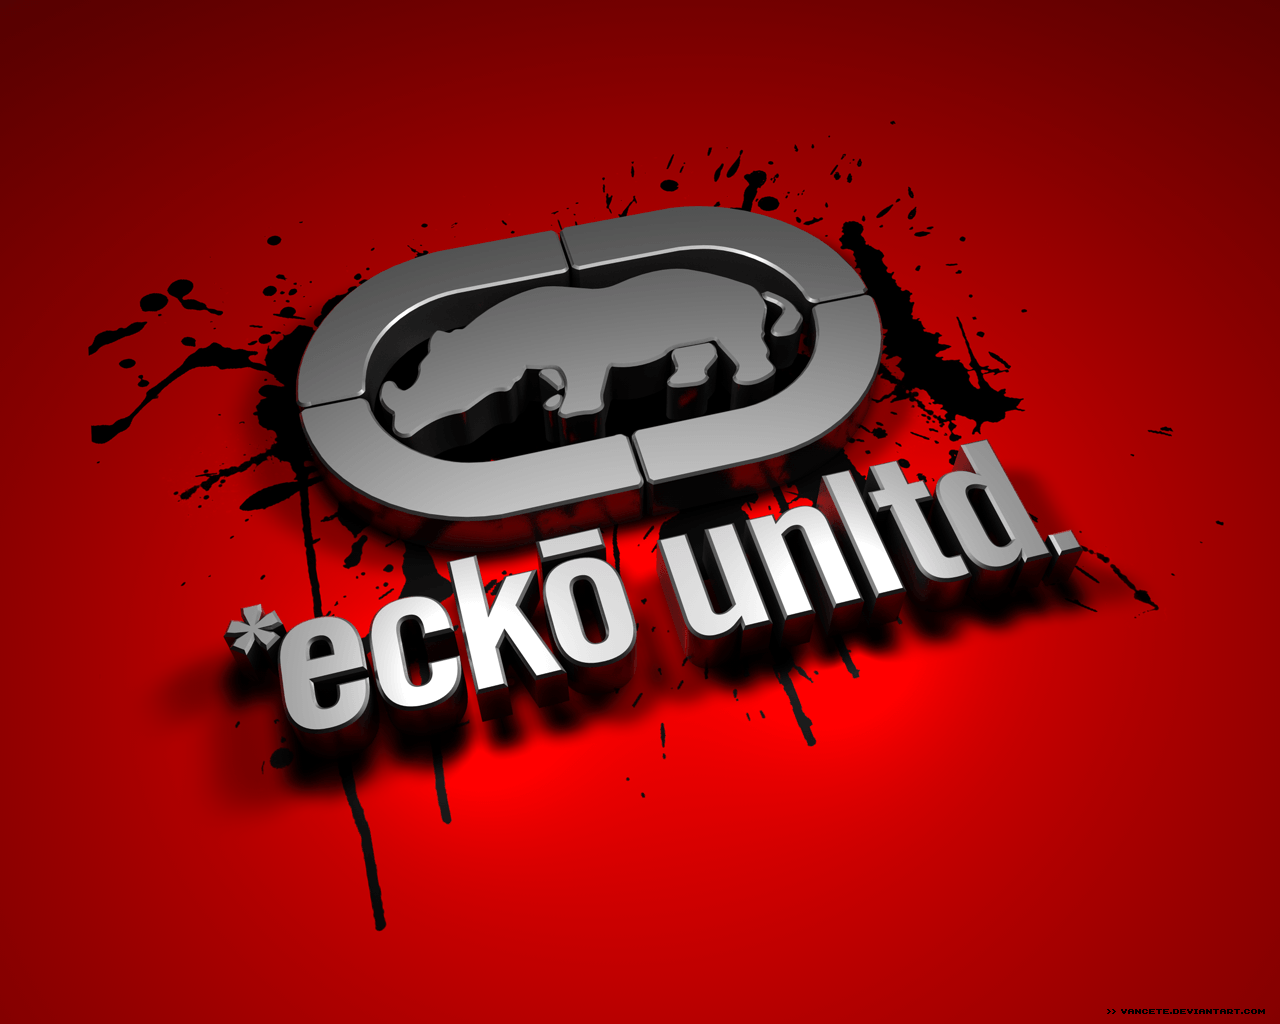 Ecko Clothing Logo - Pin by Shane Bournival on My Style | Iphone, Wallpaper, Apple iphone 5